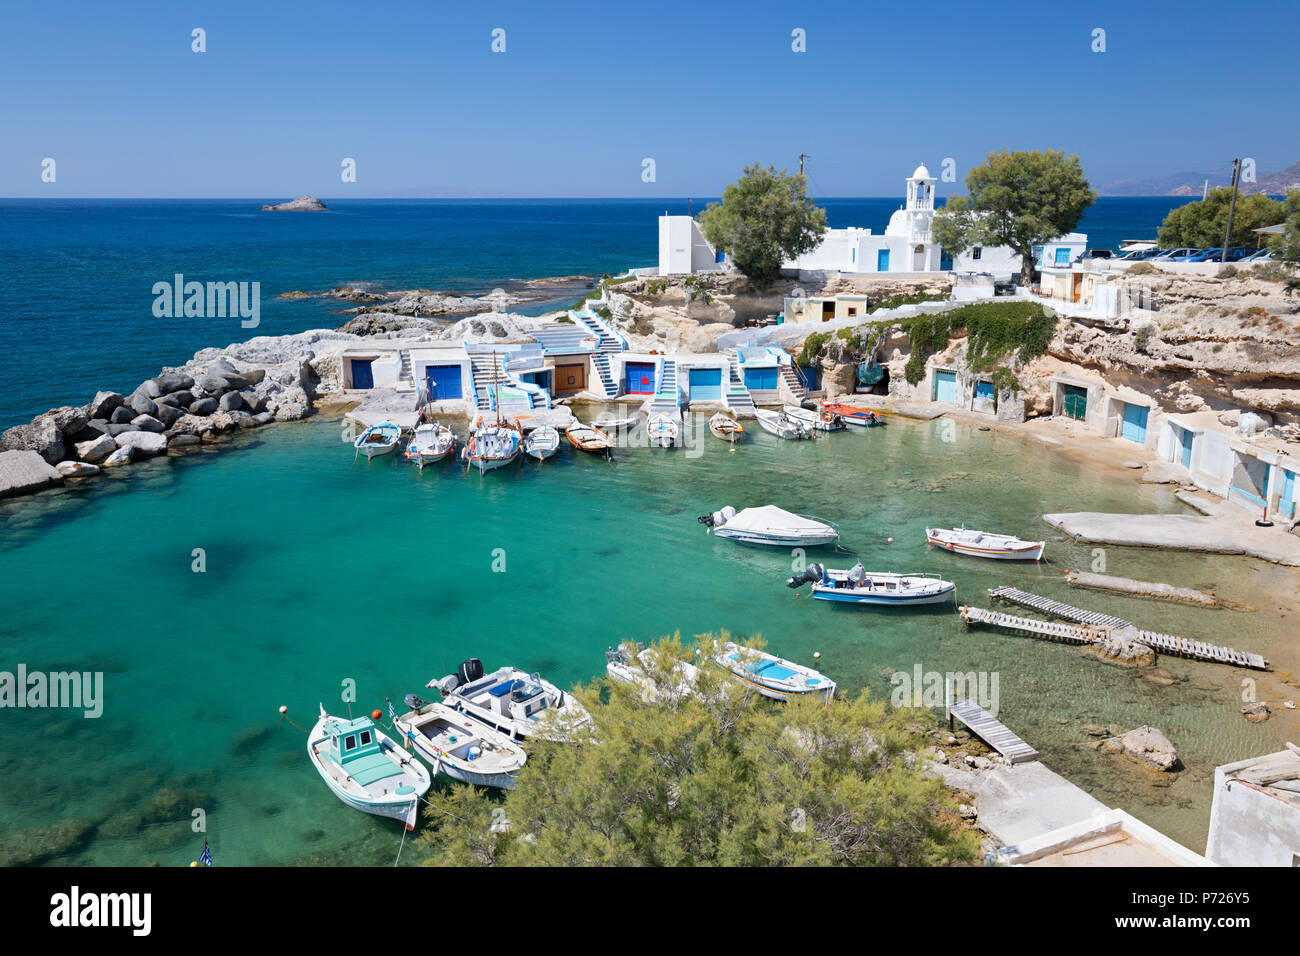 View over fishing harbour with boats and colourful boat houses, Mandrakia, Milos, Cyclades, Aegean Sea, Greek Islands, Greece, Europe Stock Photo